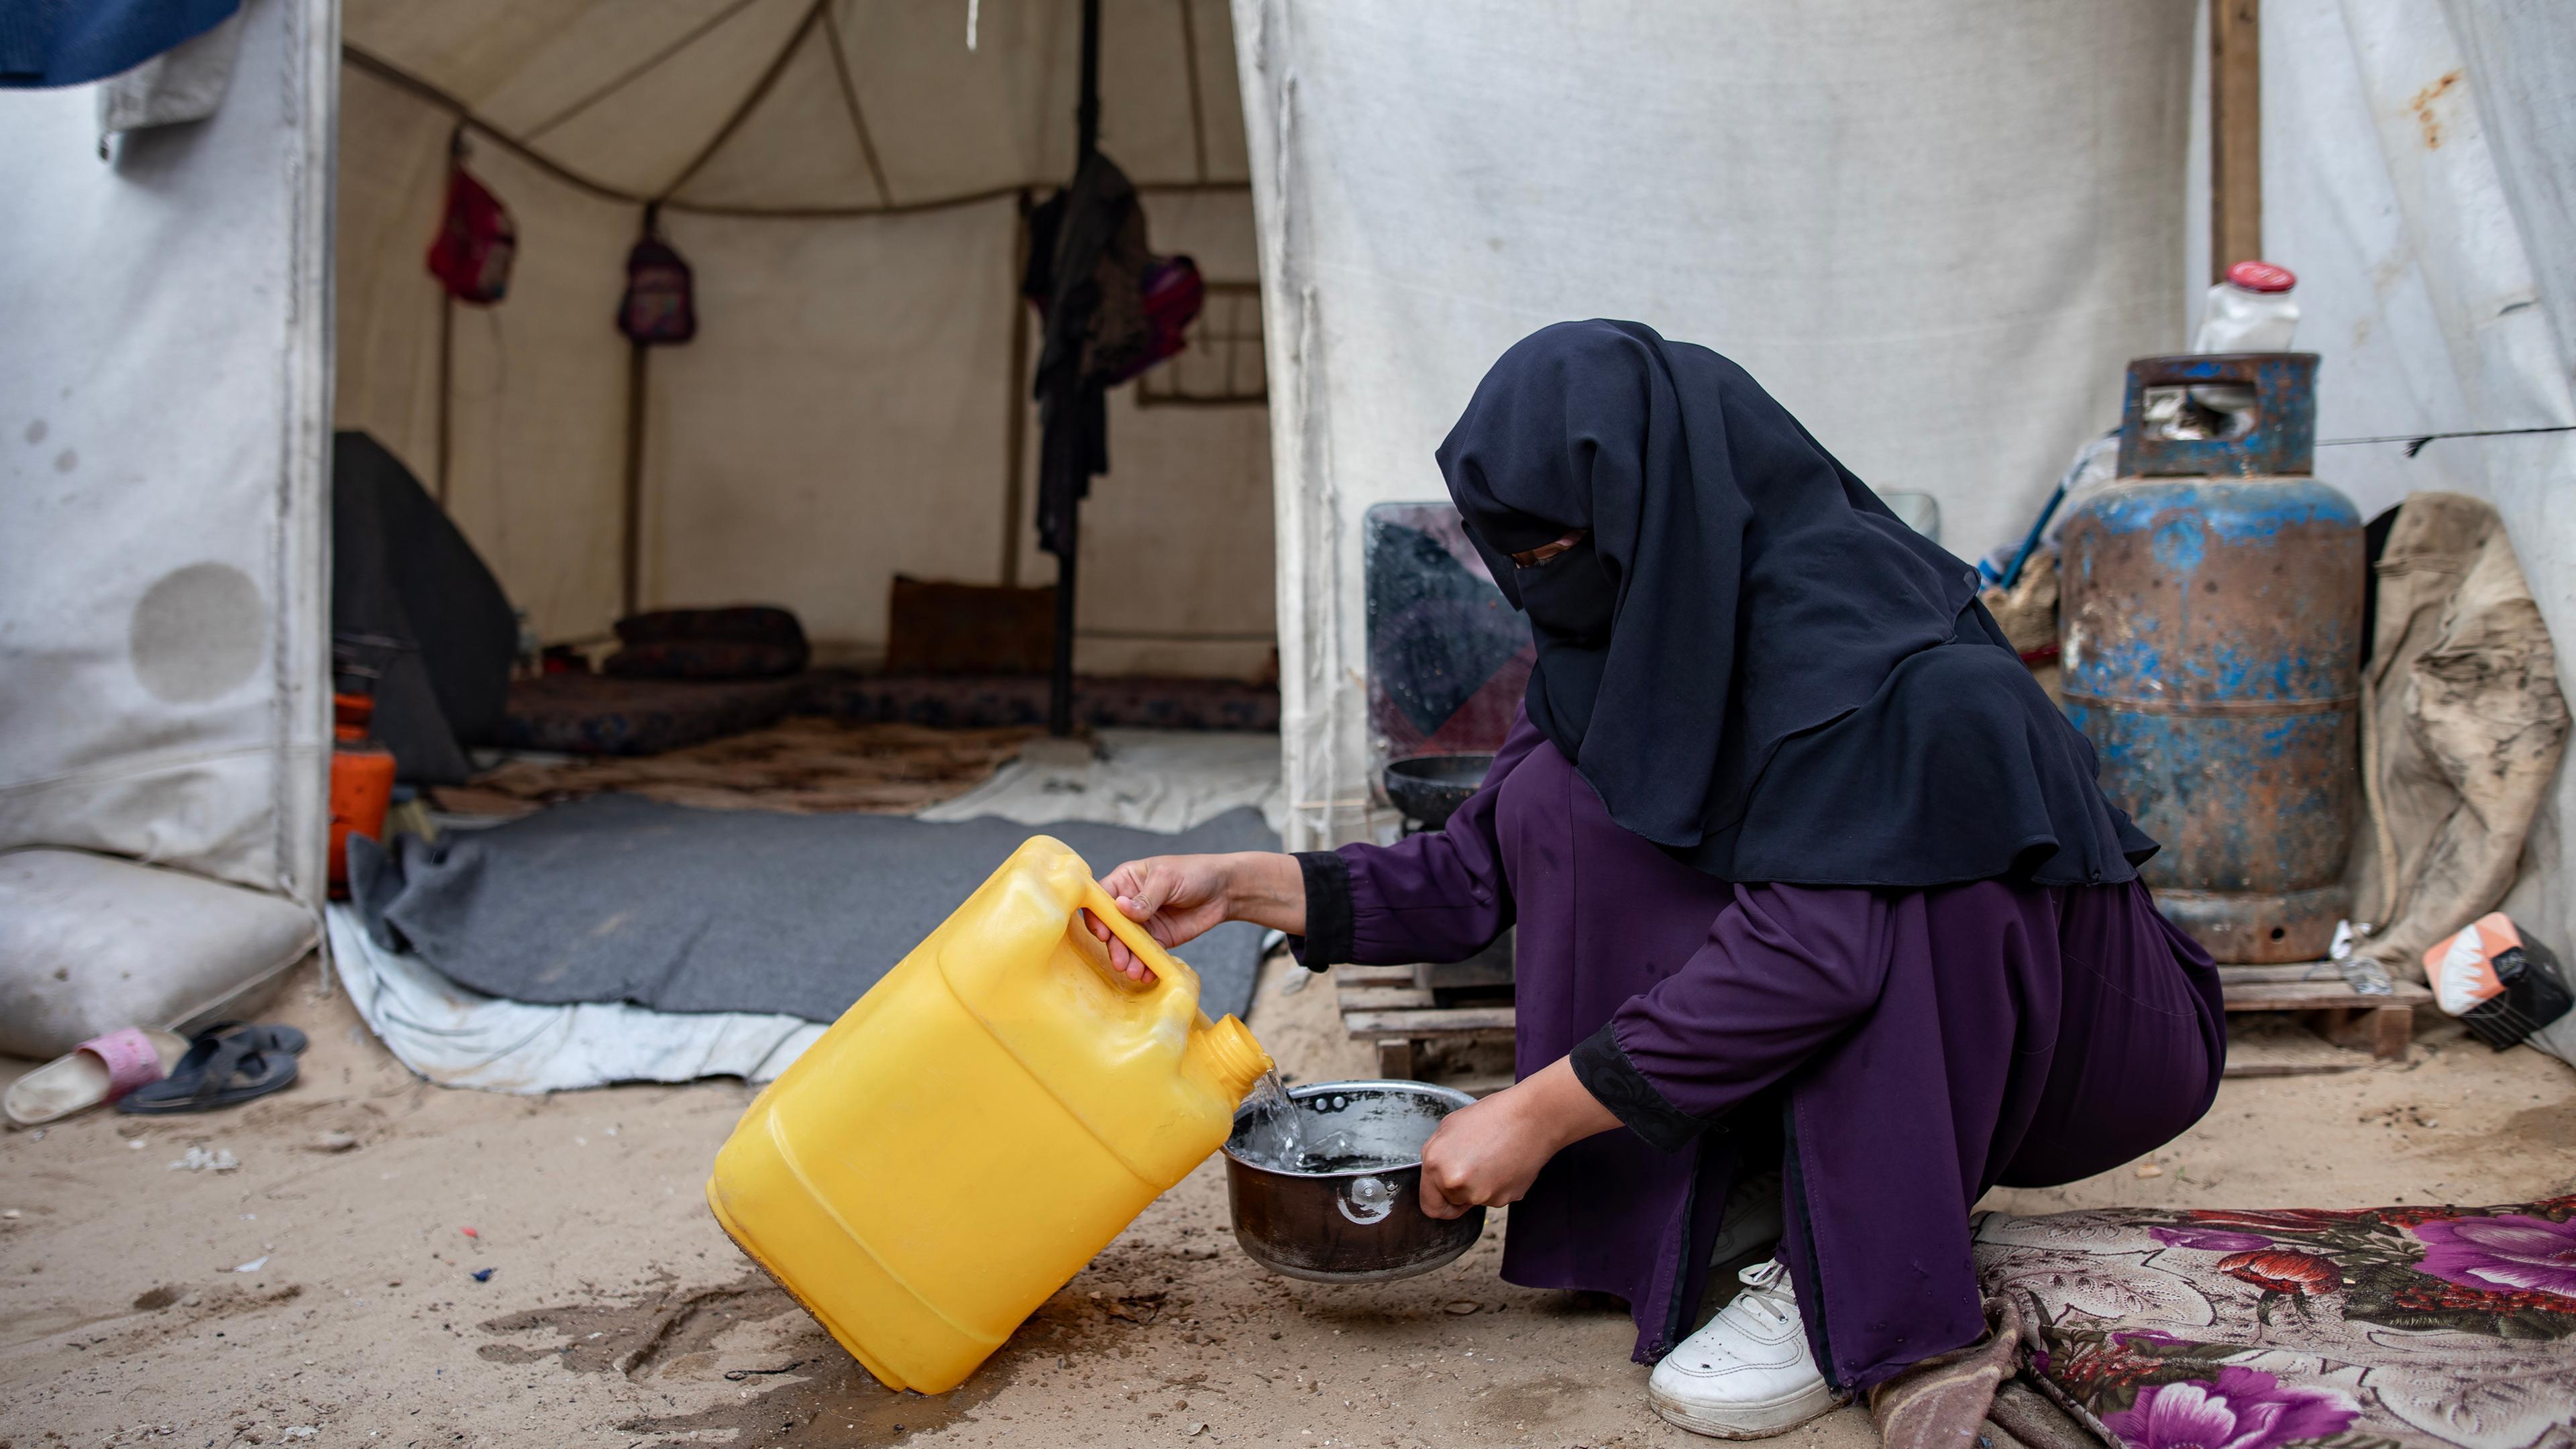 Palestinians in Gaza face dire water and sanitation conditions